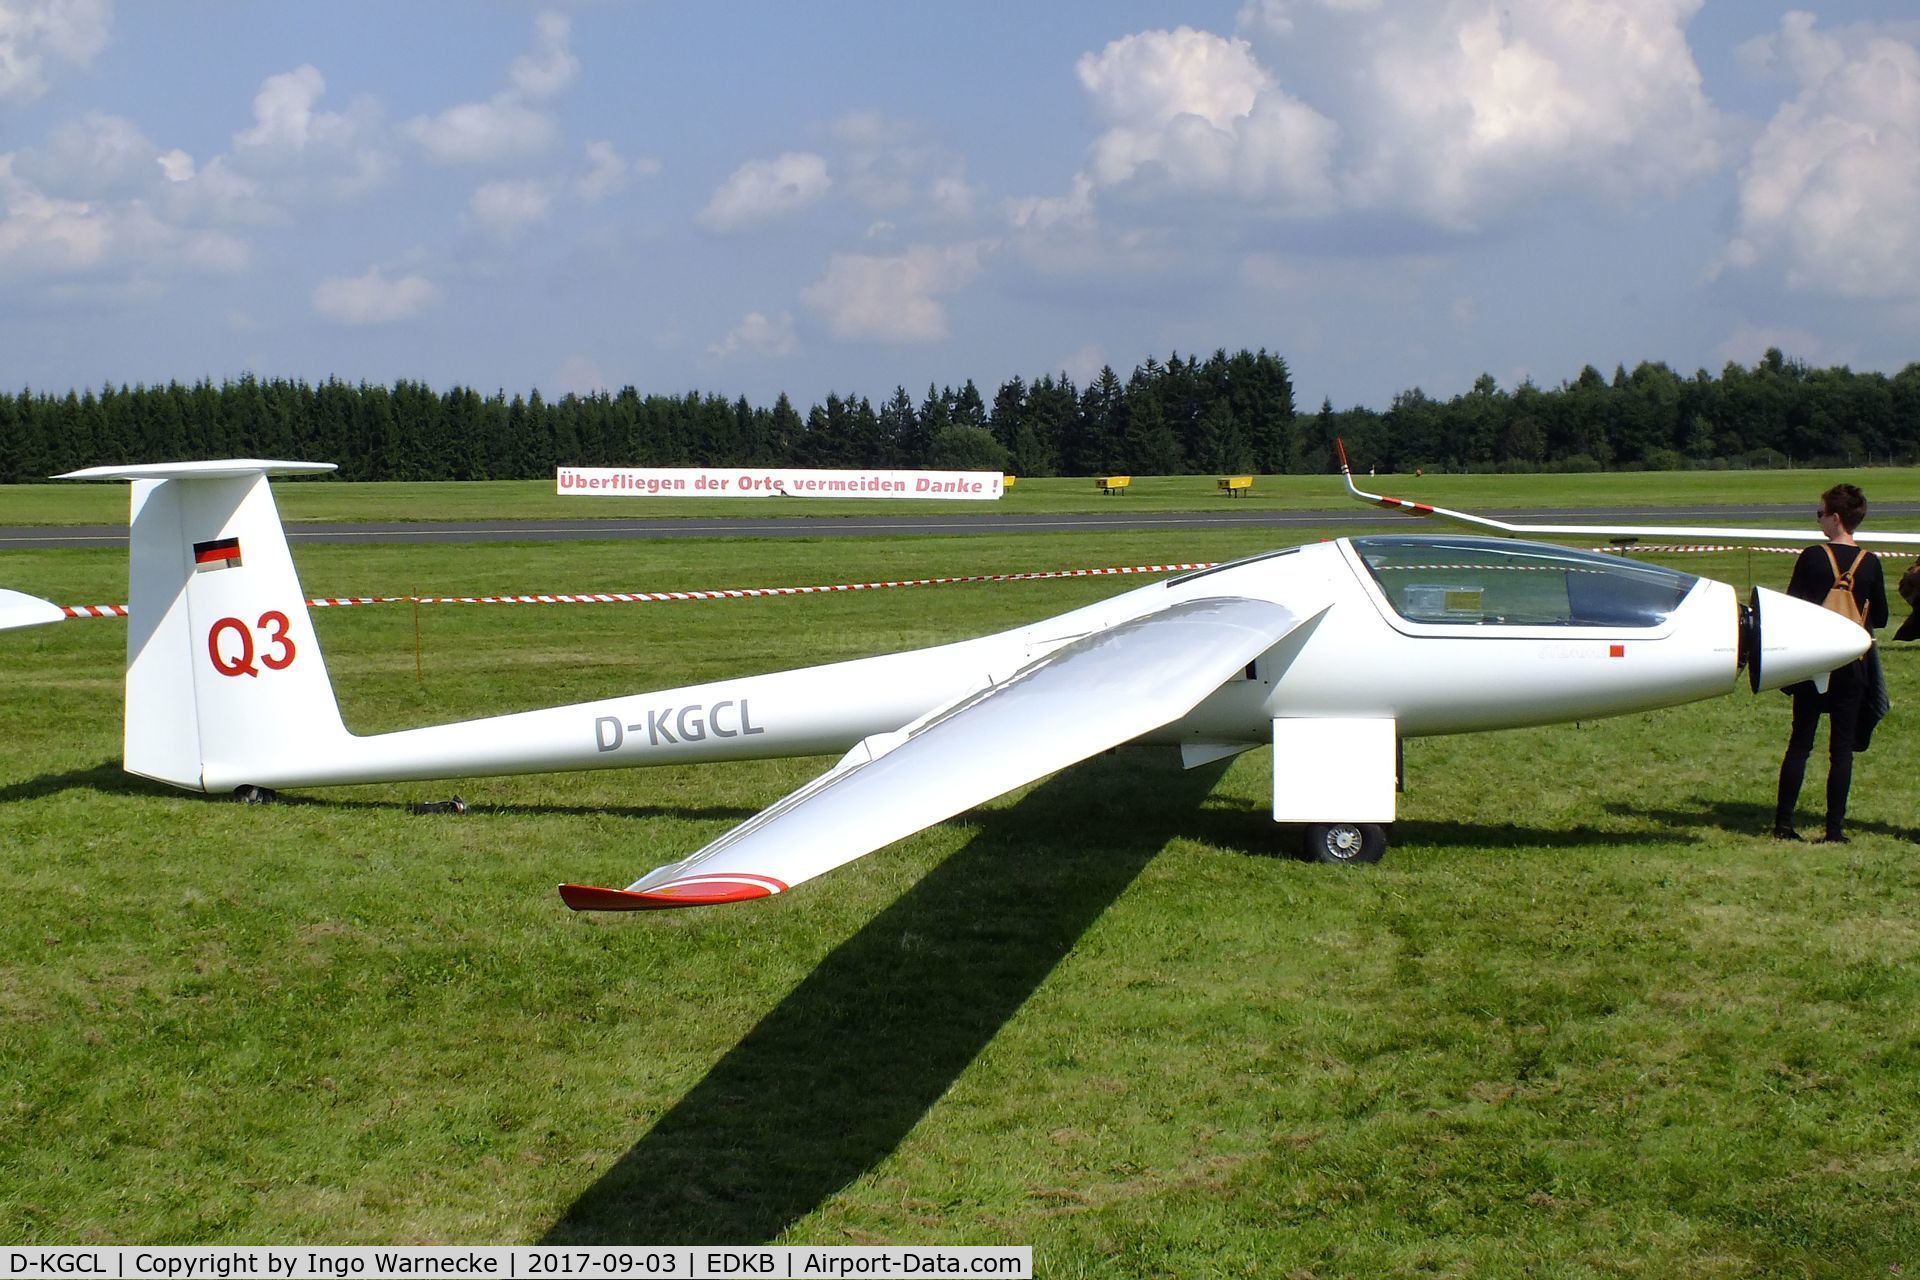 D-KGCL, Stemme S10-VT C/N Not found D-KGCL, Stemme S-10VT at the Dahlemer Binz 60th jubilee airfield display